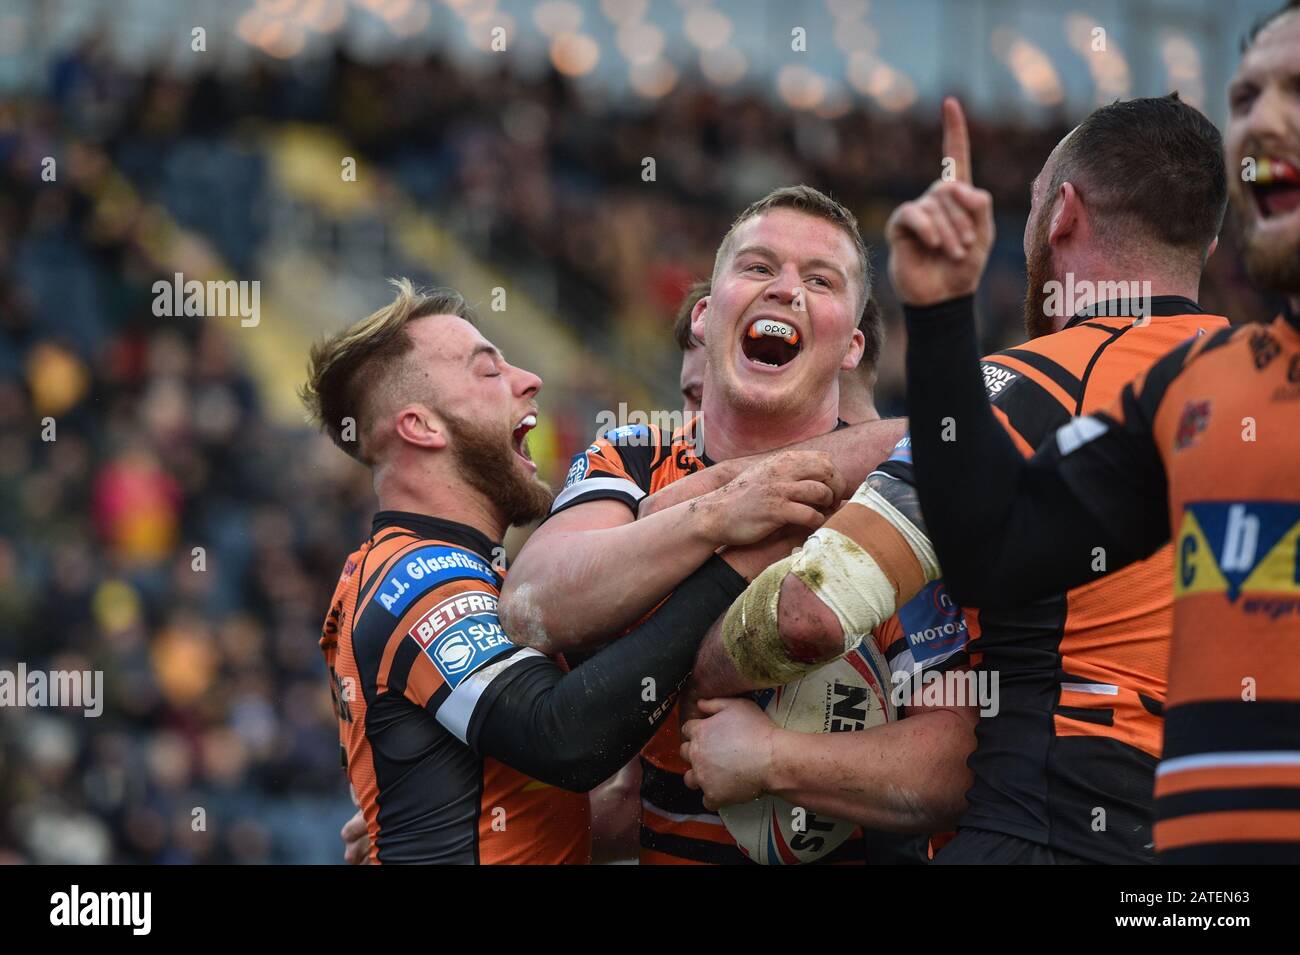 Leeds, UK, 2nd February 2020. Adam Milner of Castleford Tigers celebrates scoring a try  against Super League new boys Toronto Wolfpack. Credit: Dean Williams/Alamy Live News Stock Photo